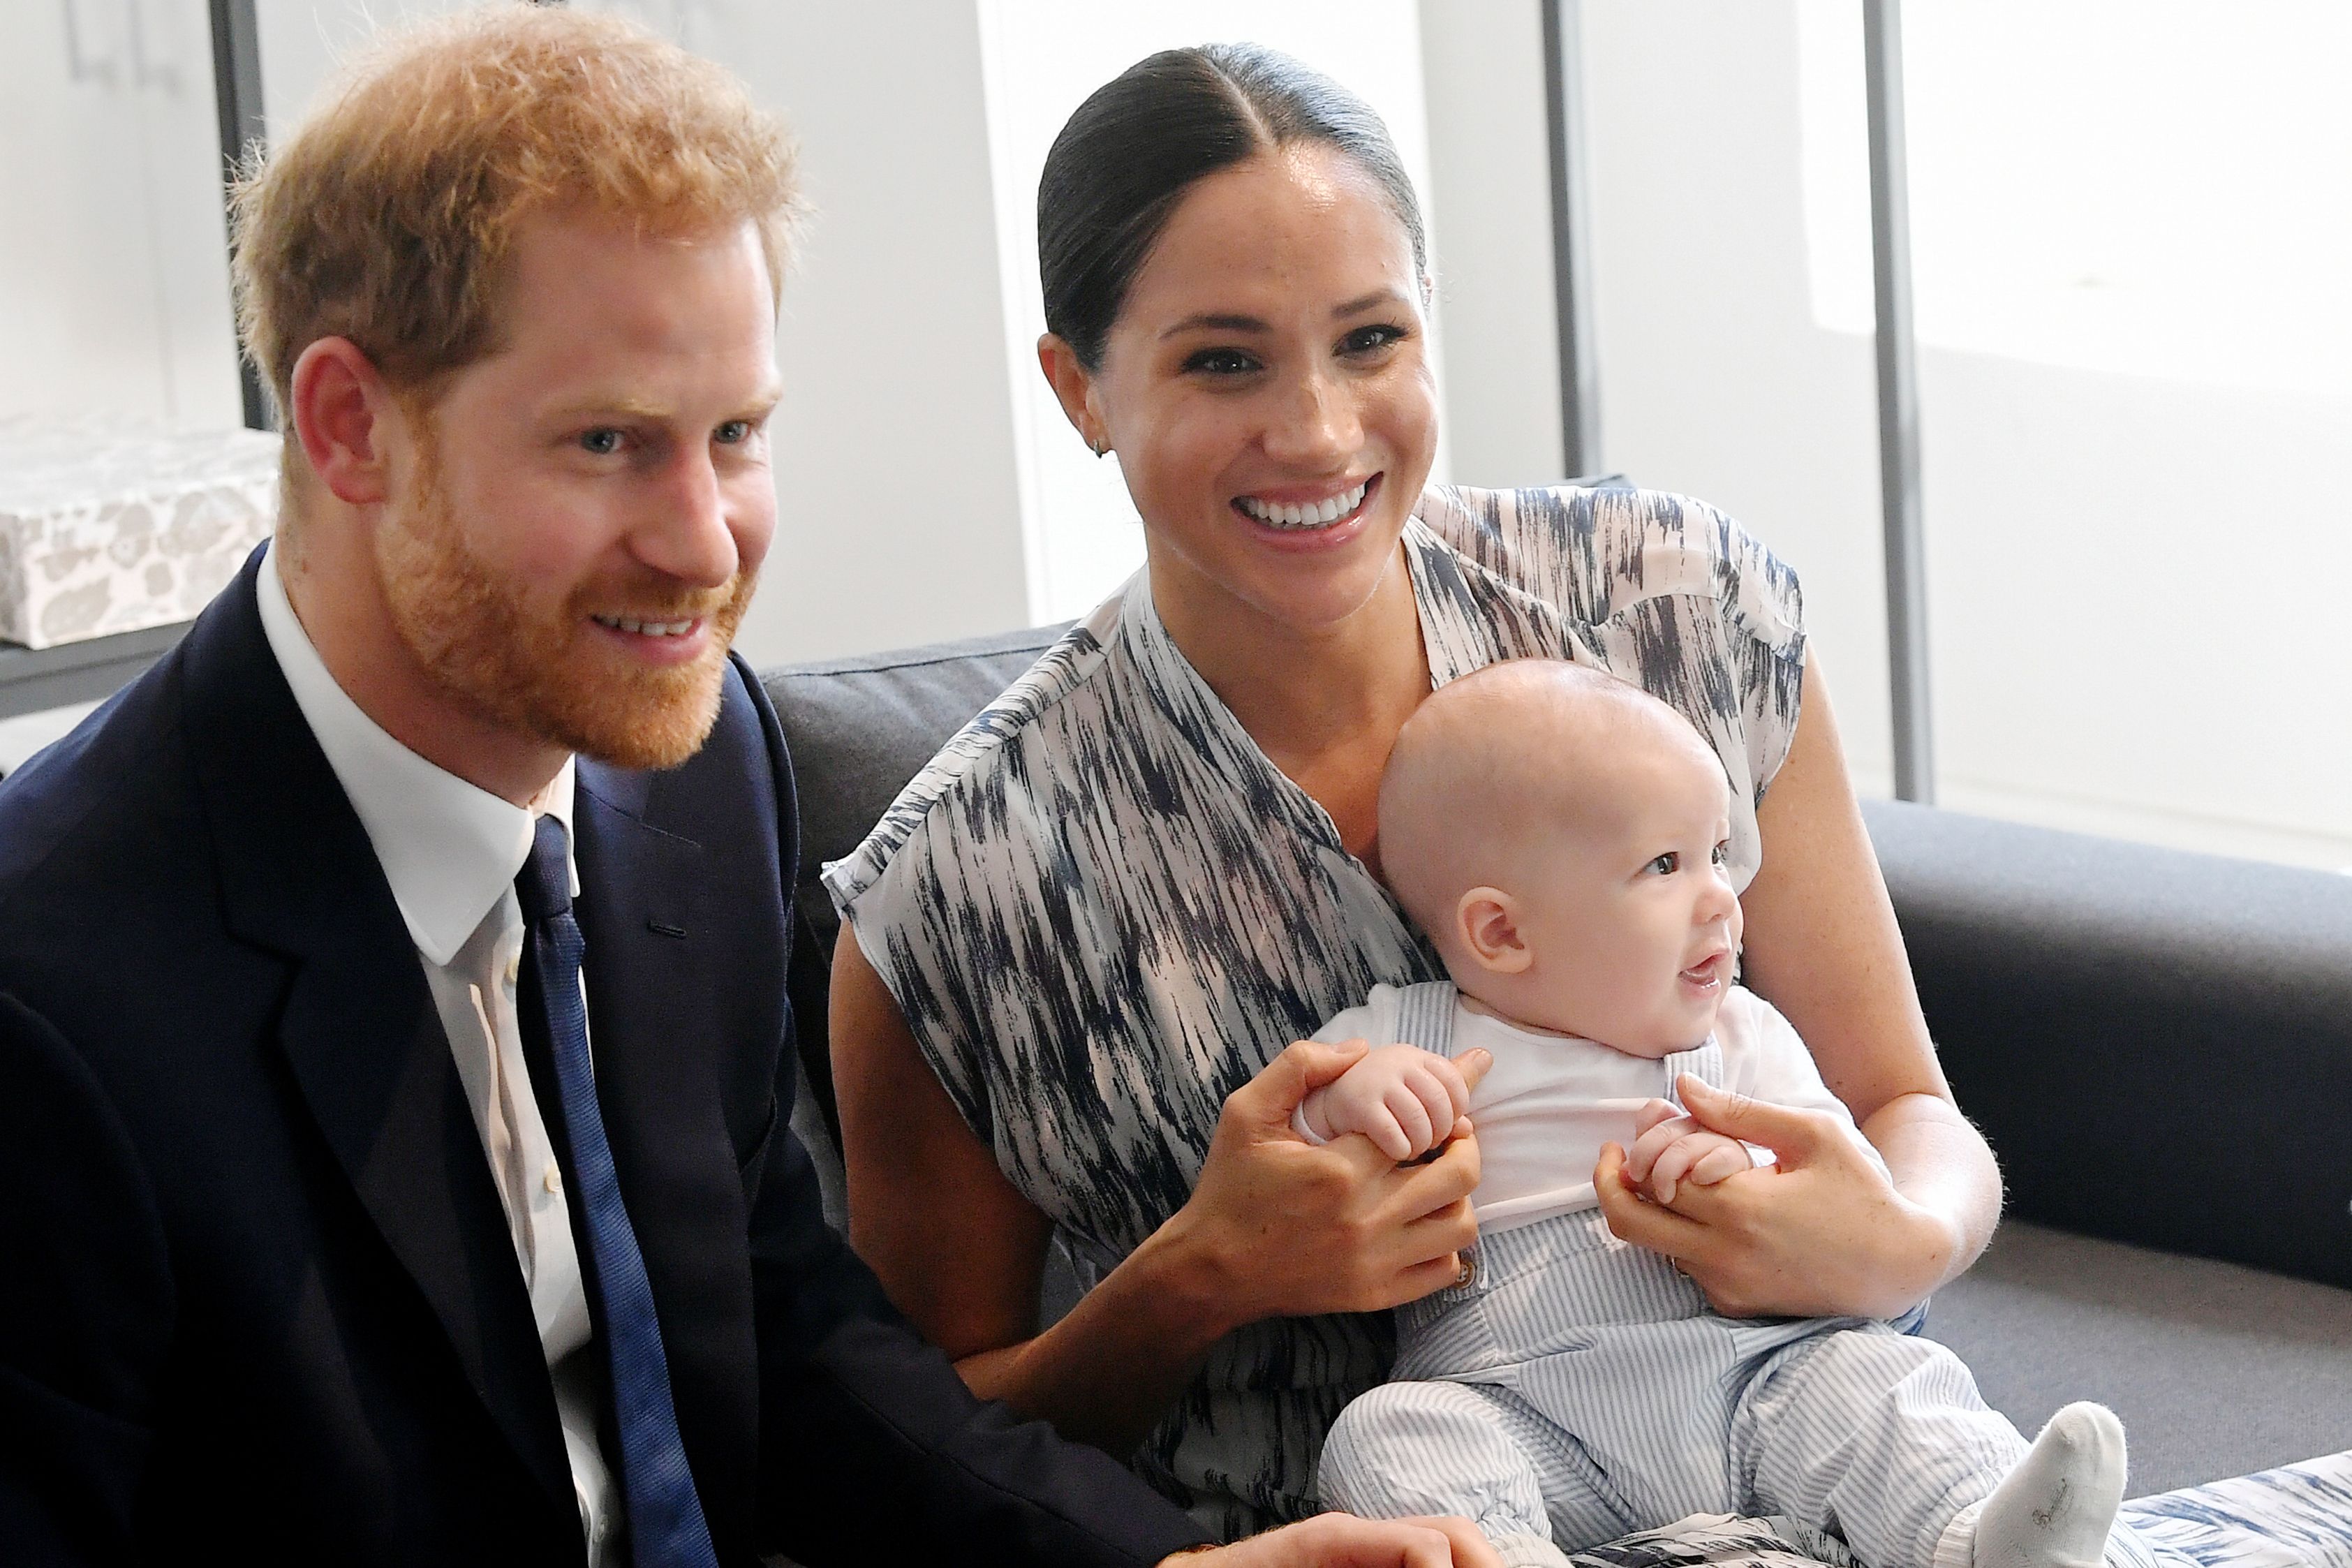 Prince Harry, Meghan Markle, and Archie Mountbatten-Windsor at the Desmond & Leah Tutu Legacy Foundation during their royal tour of South Africa on September 25, 2019 in Cape Town, South Africa. | Source: Getty Images